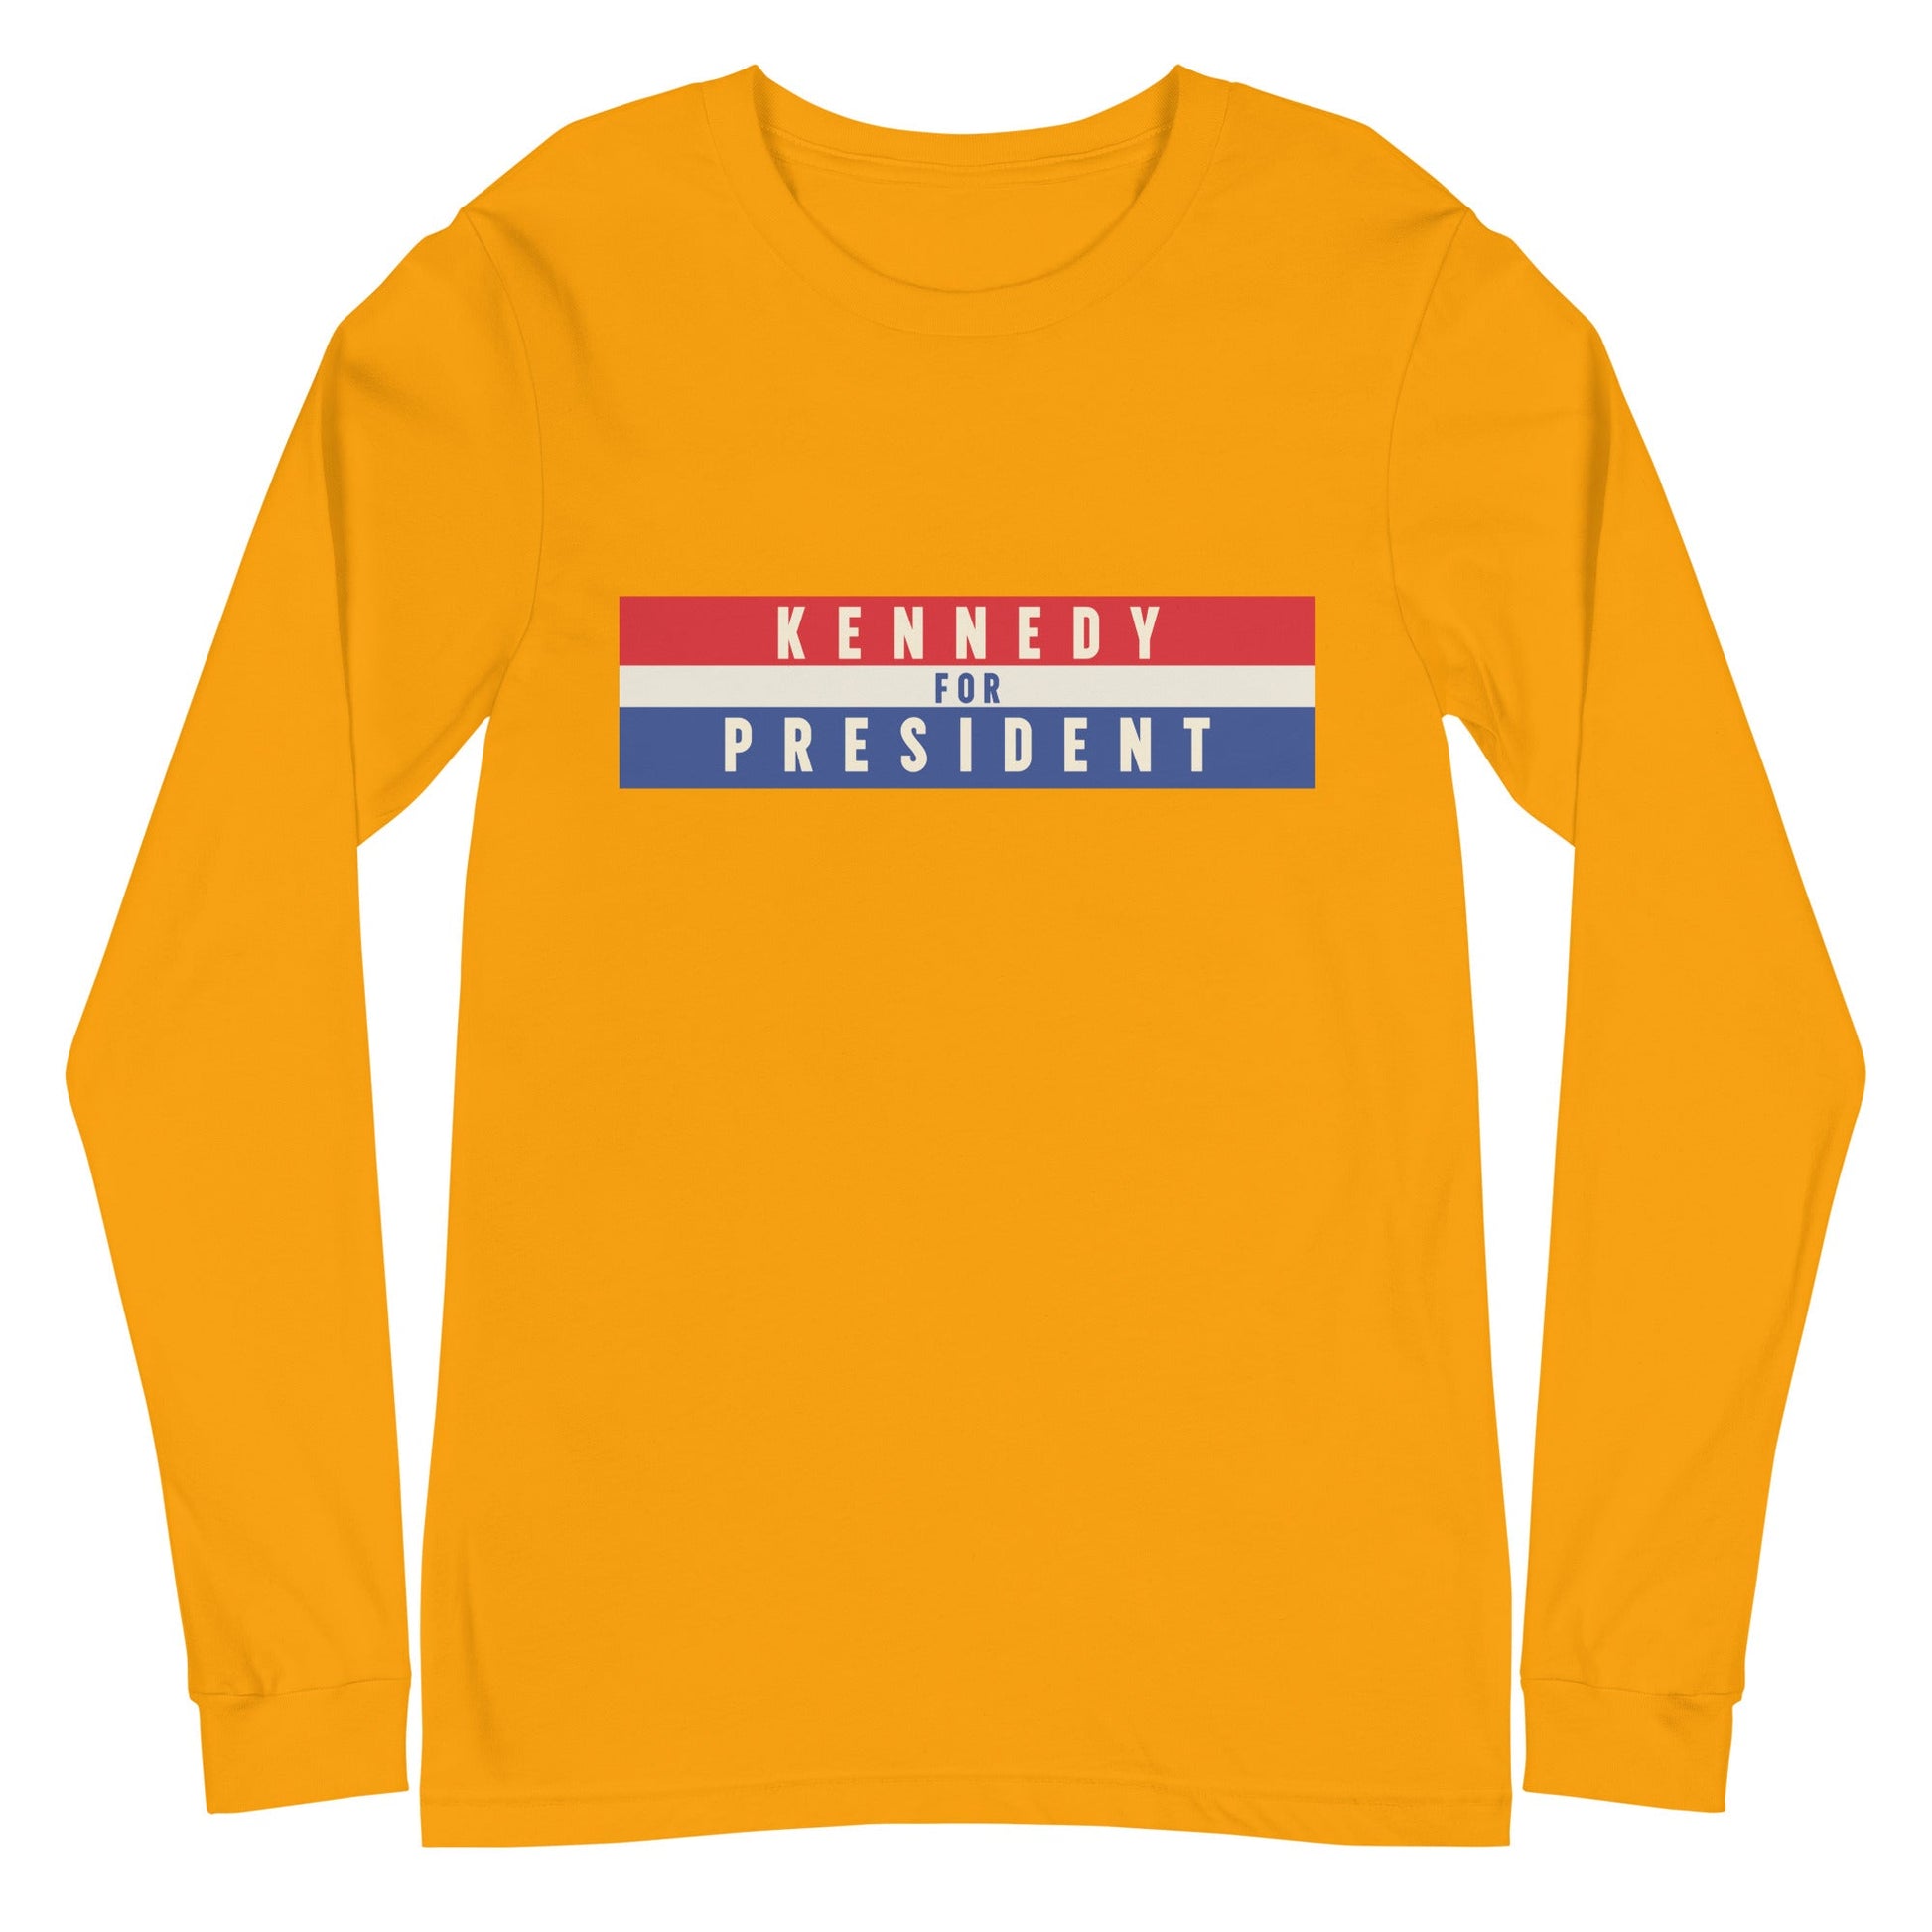 Kennedy for President 2024 Unisex Long Sleeve Tee - TEAM KENNEDY. All rights reserved